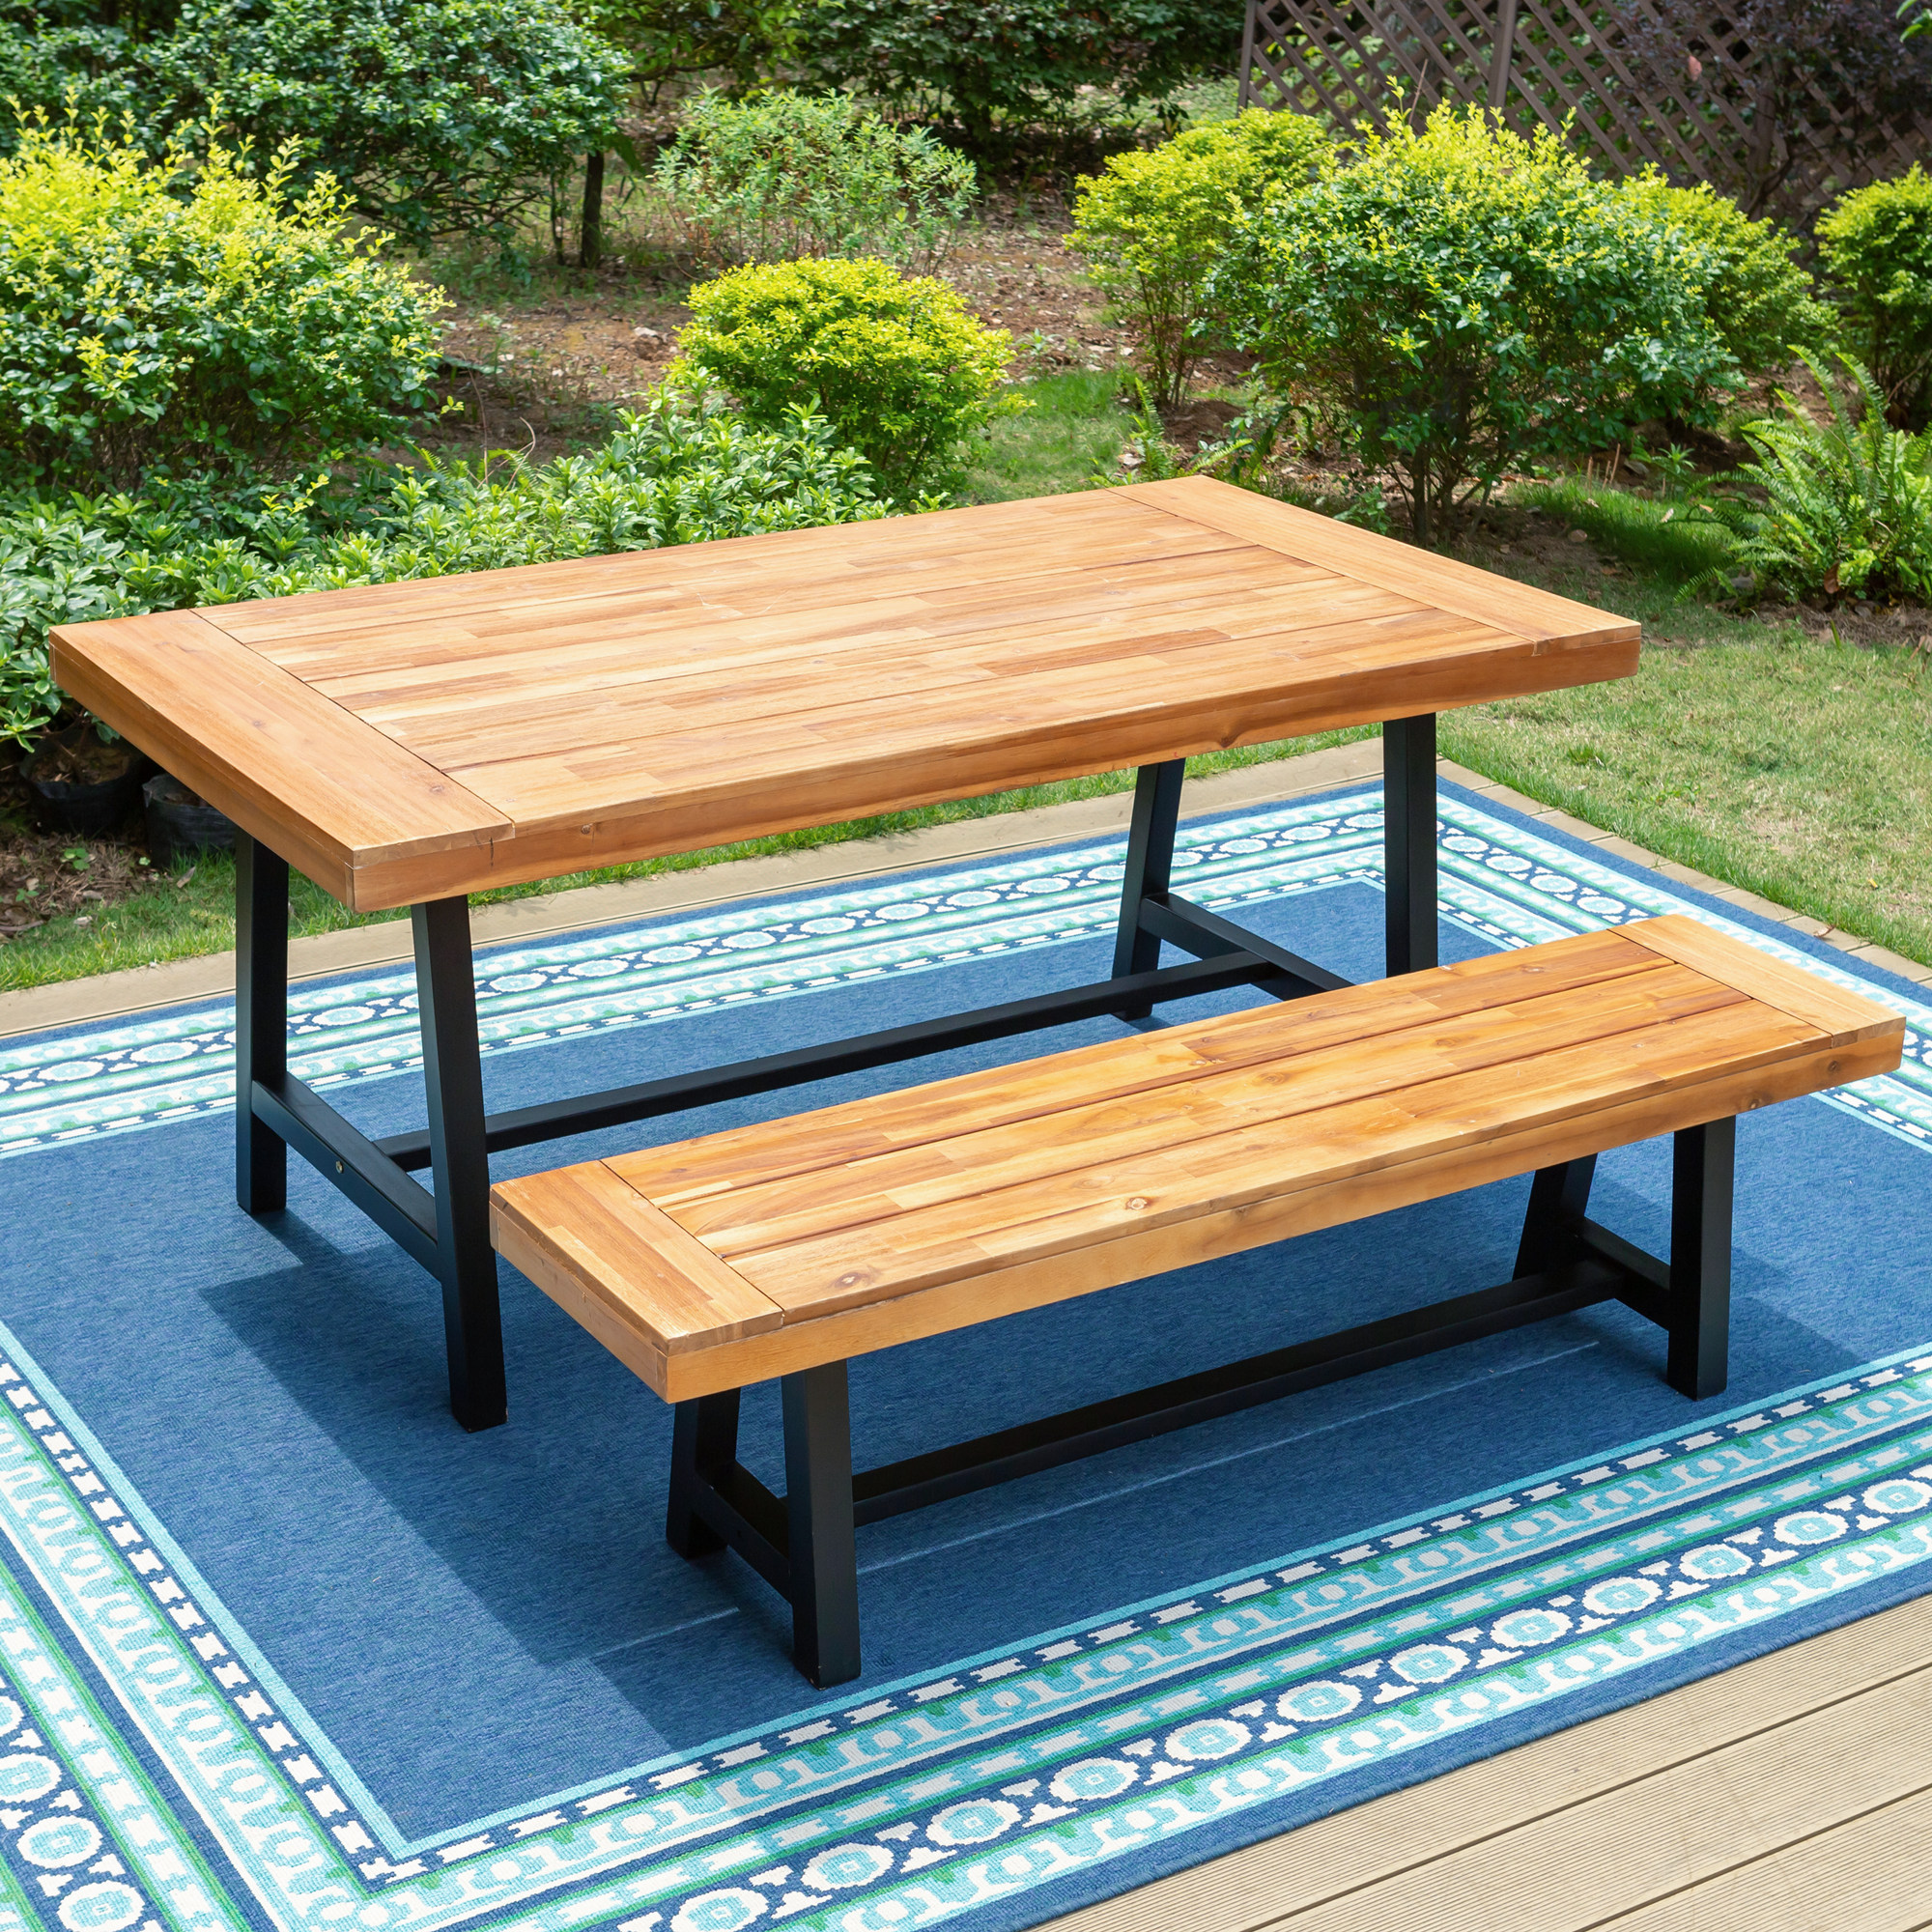 MF Studio Set of 2 Patio Wood Garden Bench Set Outdoor Wooden Dining Set with 1 Acacia Table and 1 Bench Suitable for 2 People - image 1 of 8